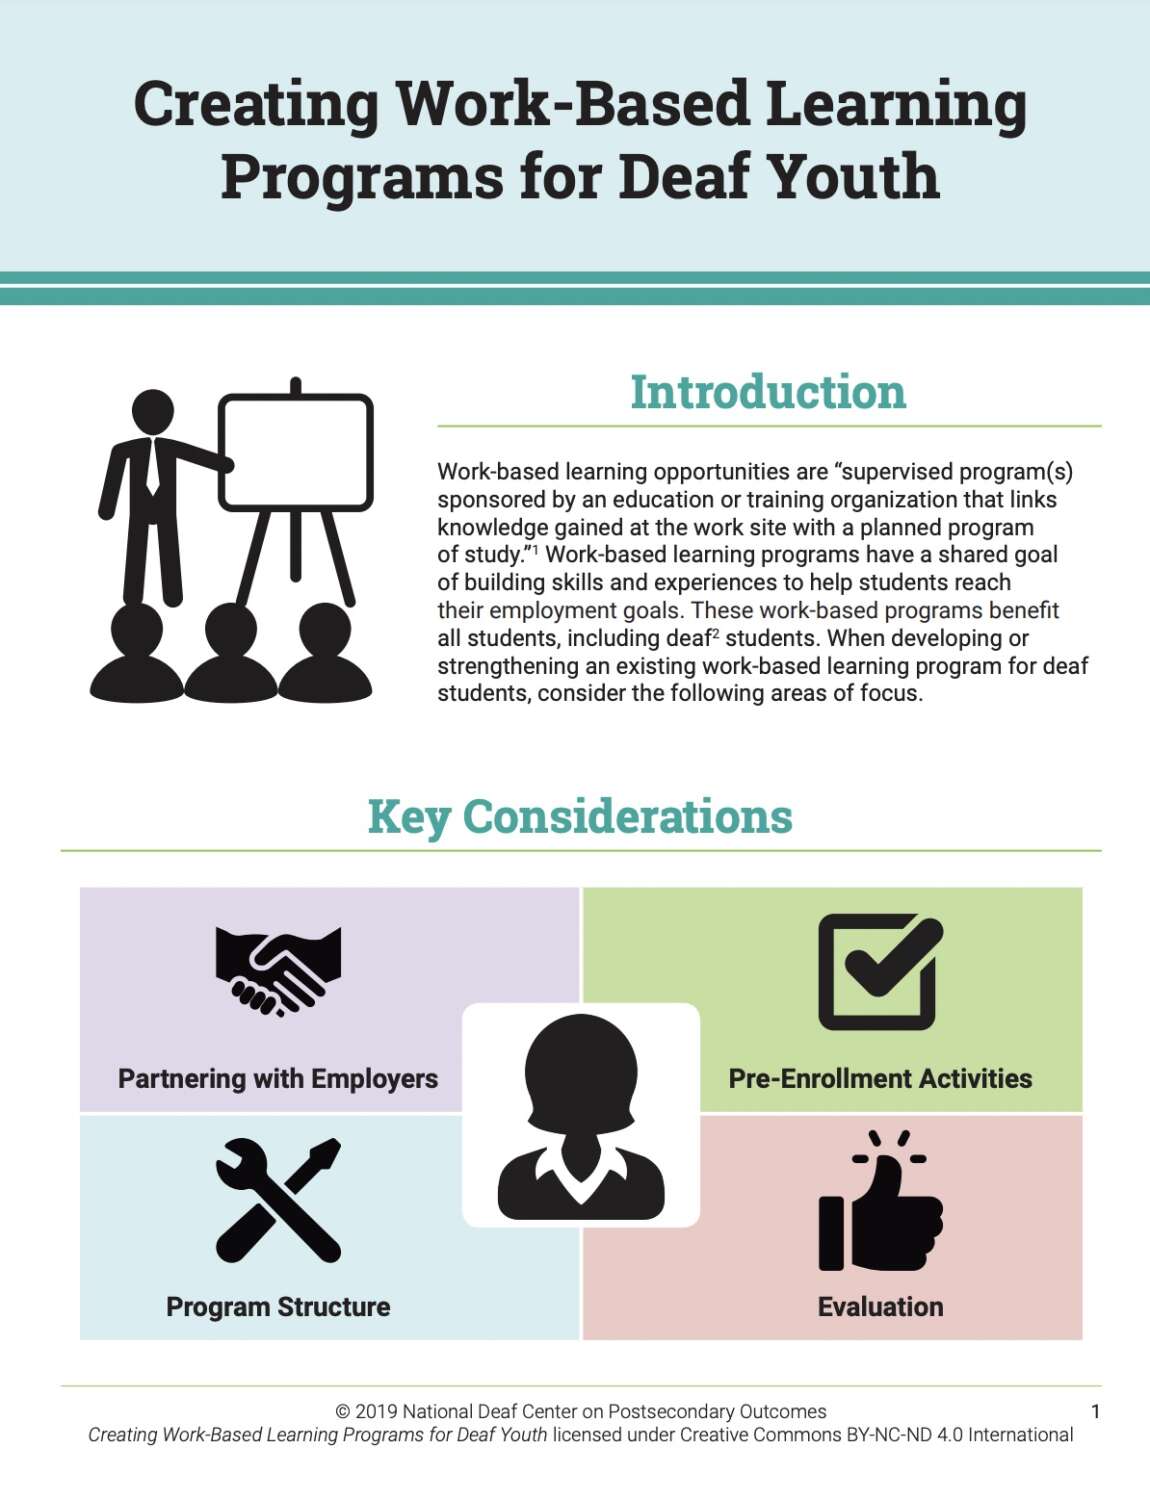 The content provided is a description of creating work-based learning programs for deaf youth. It includes information about the introduction, key considerations, partnering with employers, pre-enrollment activities, program structure, and evaluation.